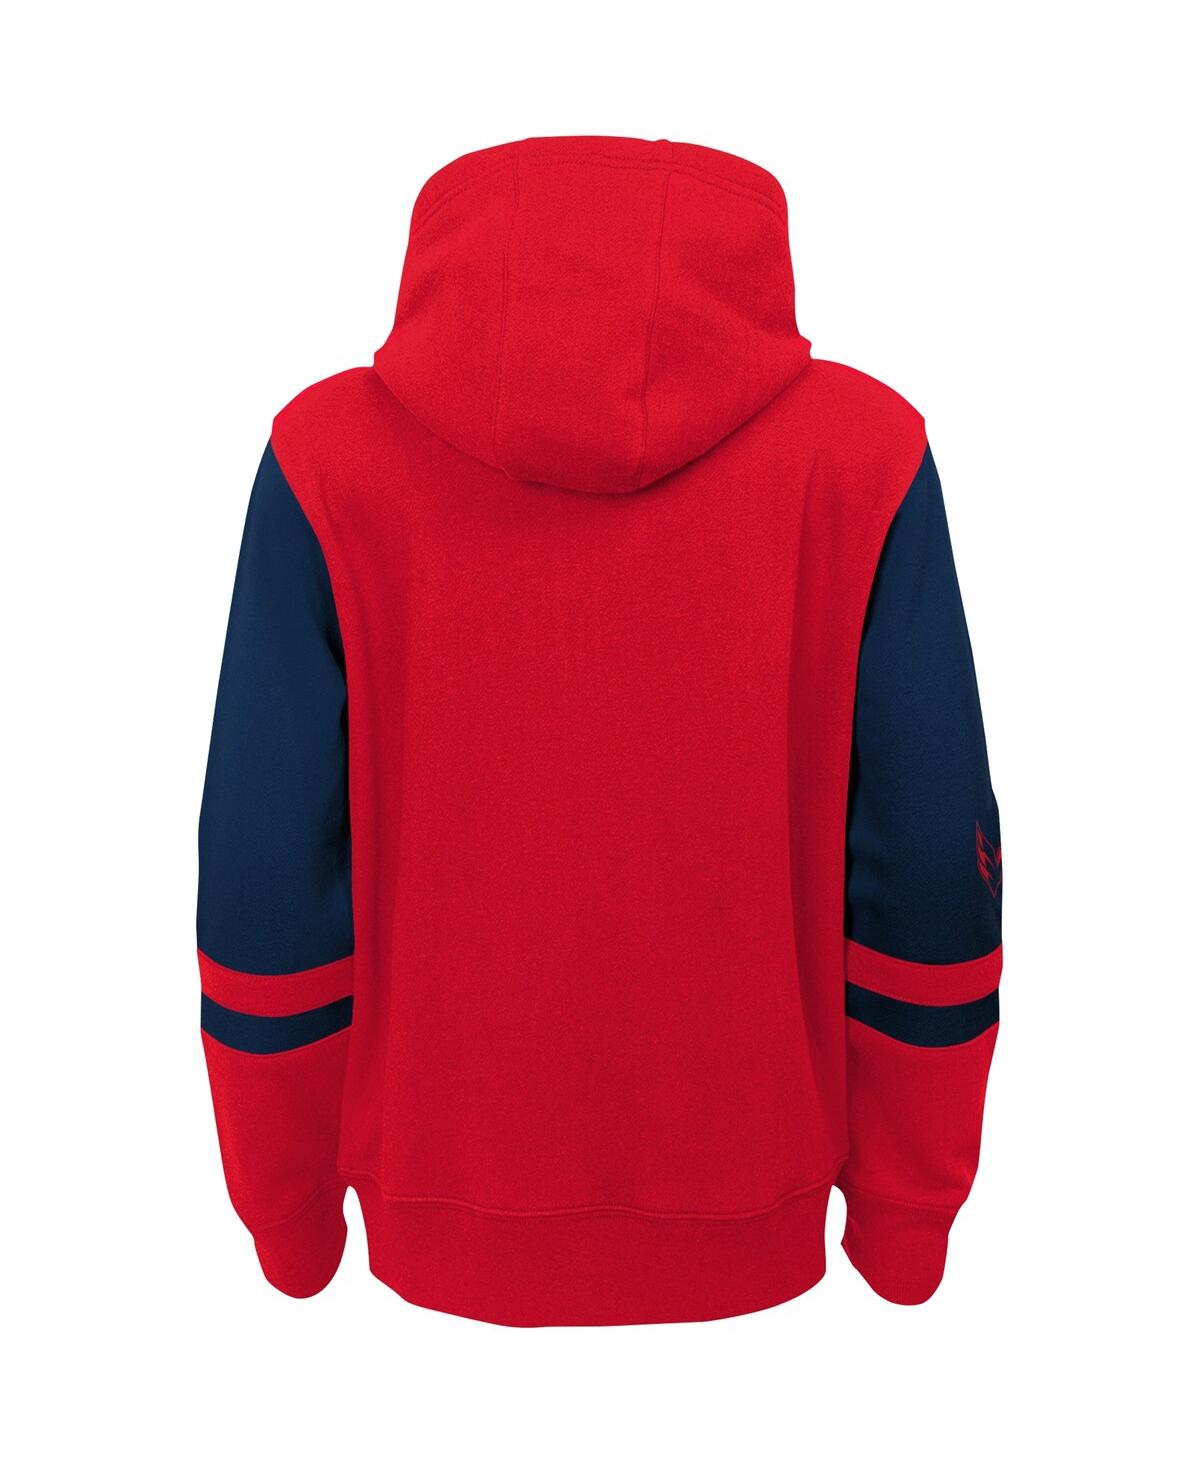 Shop Outerstuff Preschool Boys And Girls  Red Washington Capitals Face Off Full Zip Hoodie